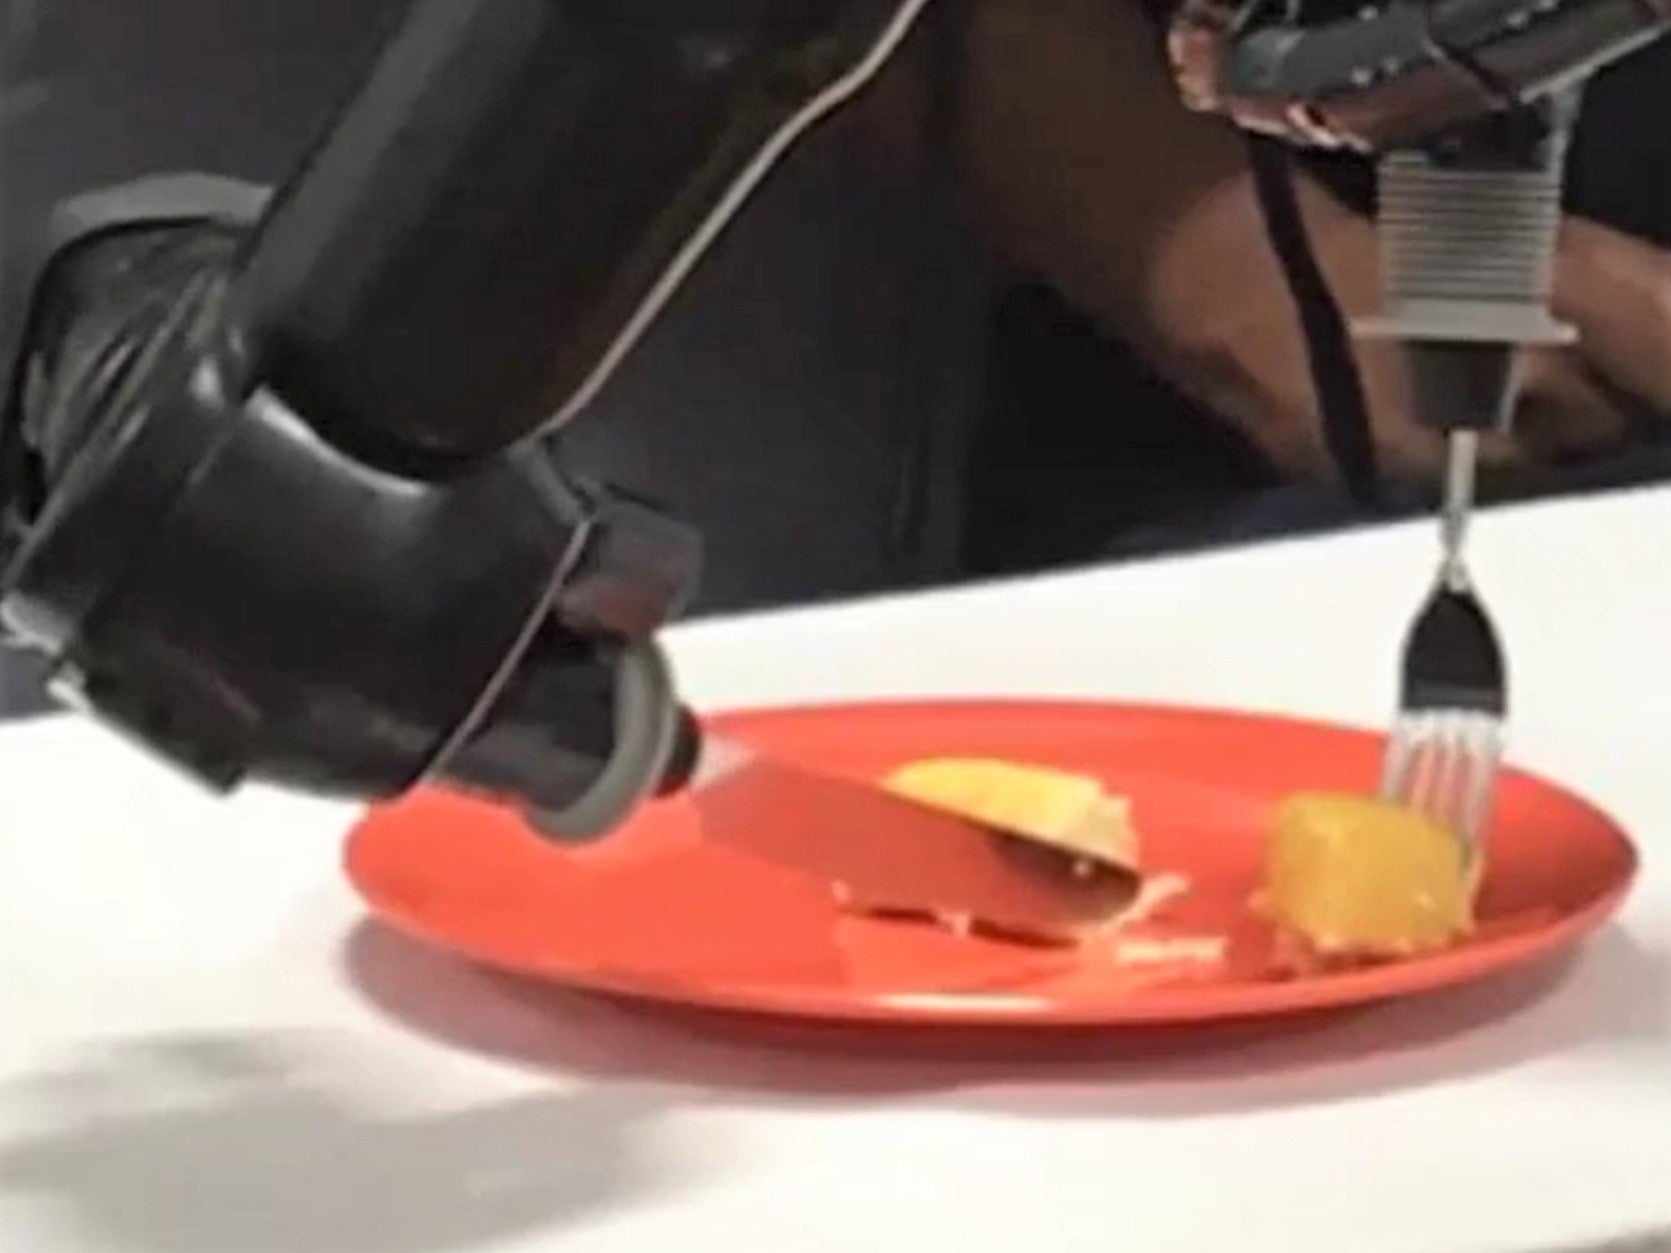 Researchers at Johns Hopkins connected a robotic arm to a paralysed person’s brain, allowing the patient to feed themselves by thinking of commands